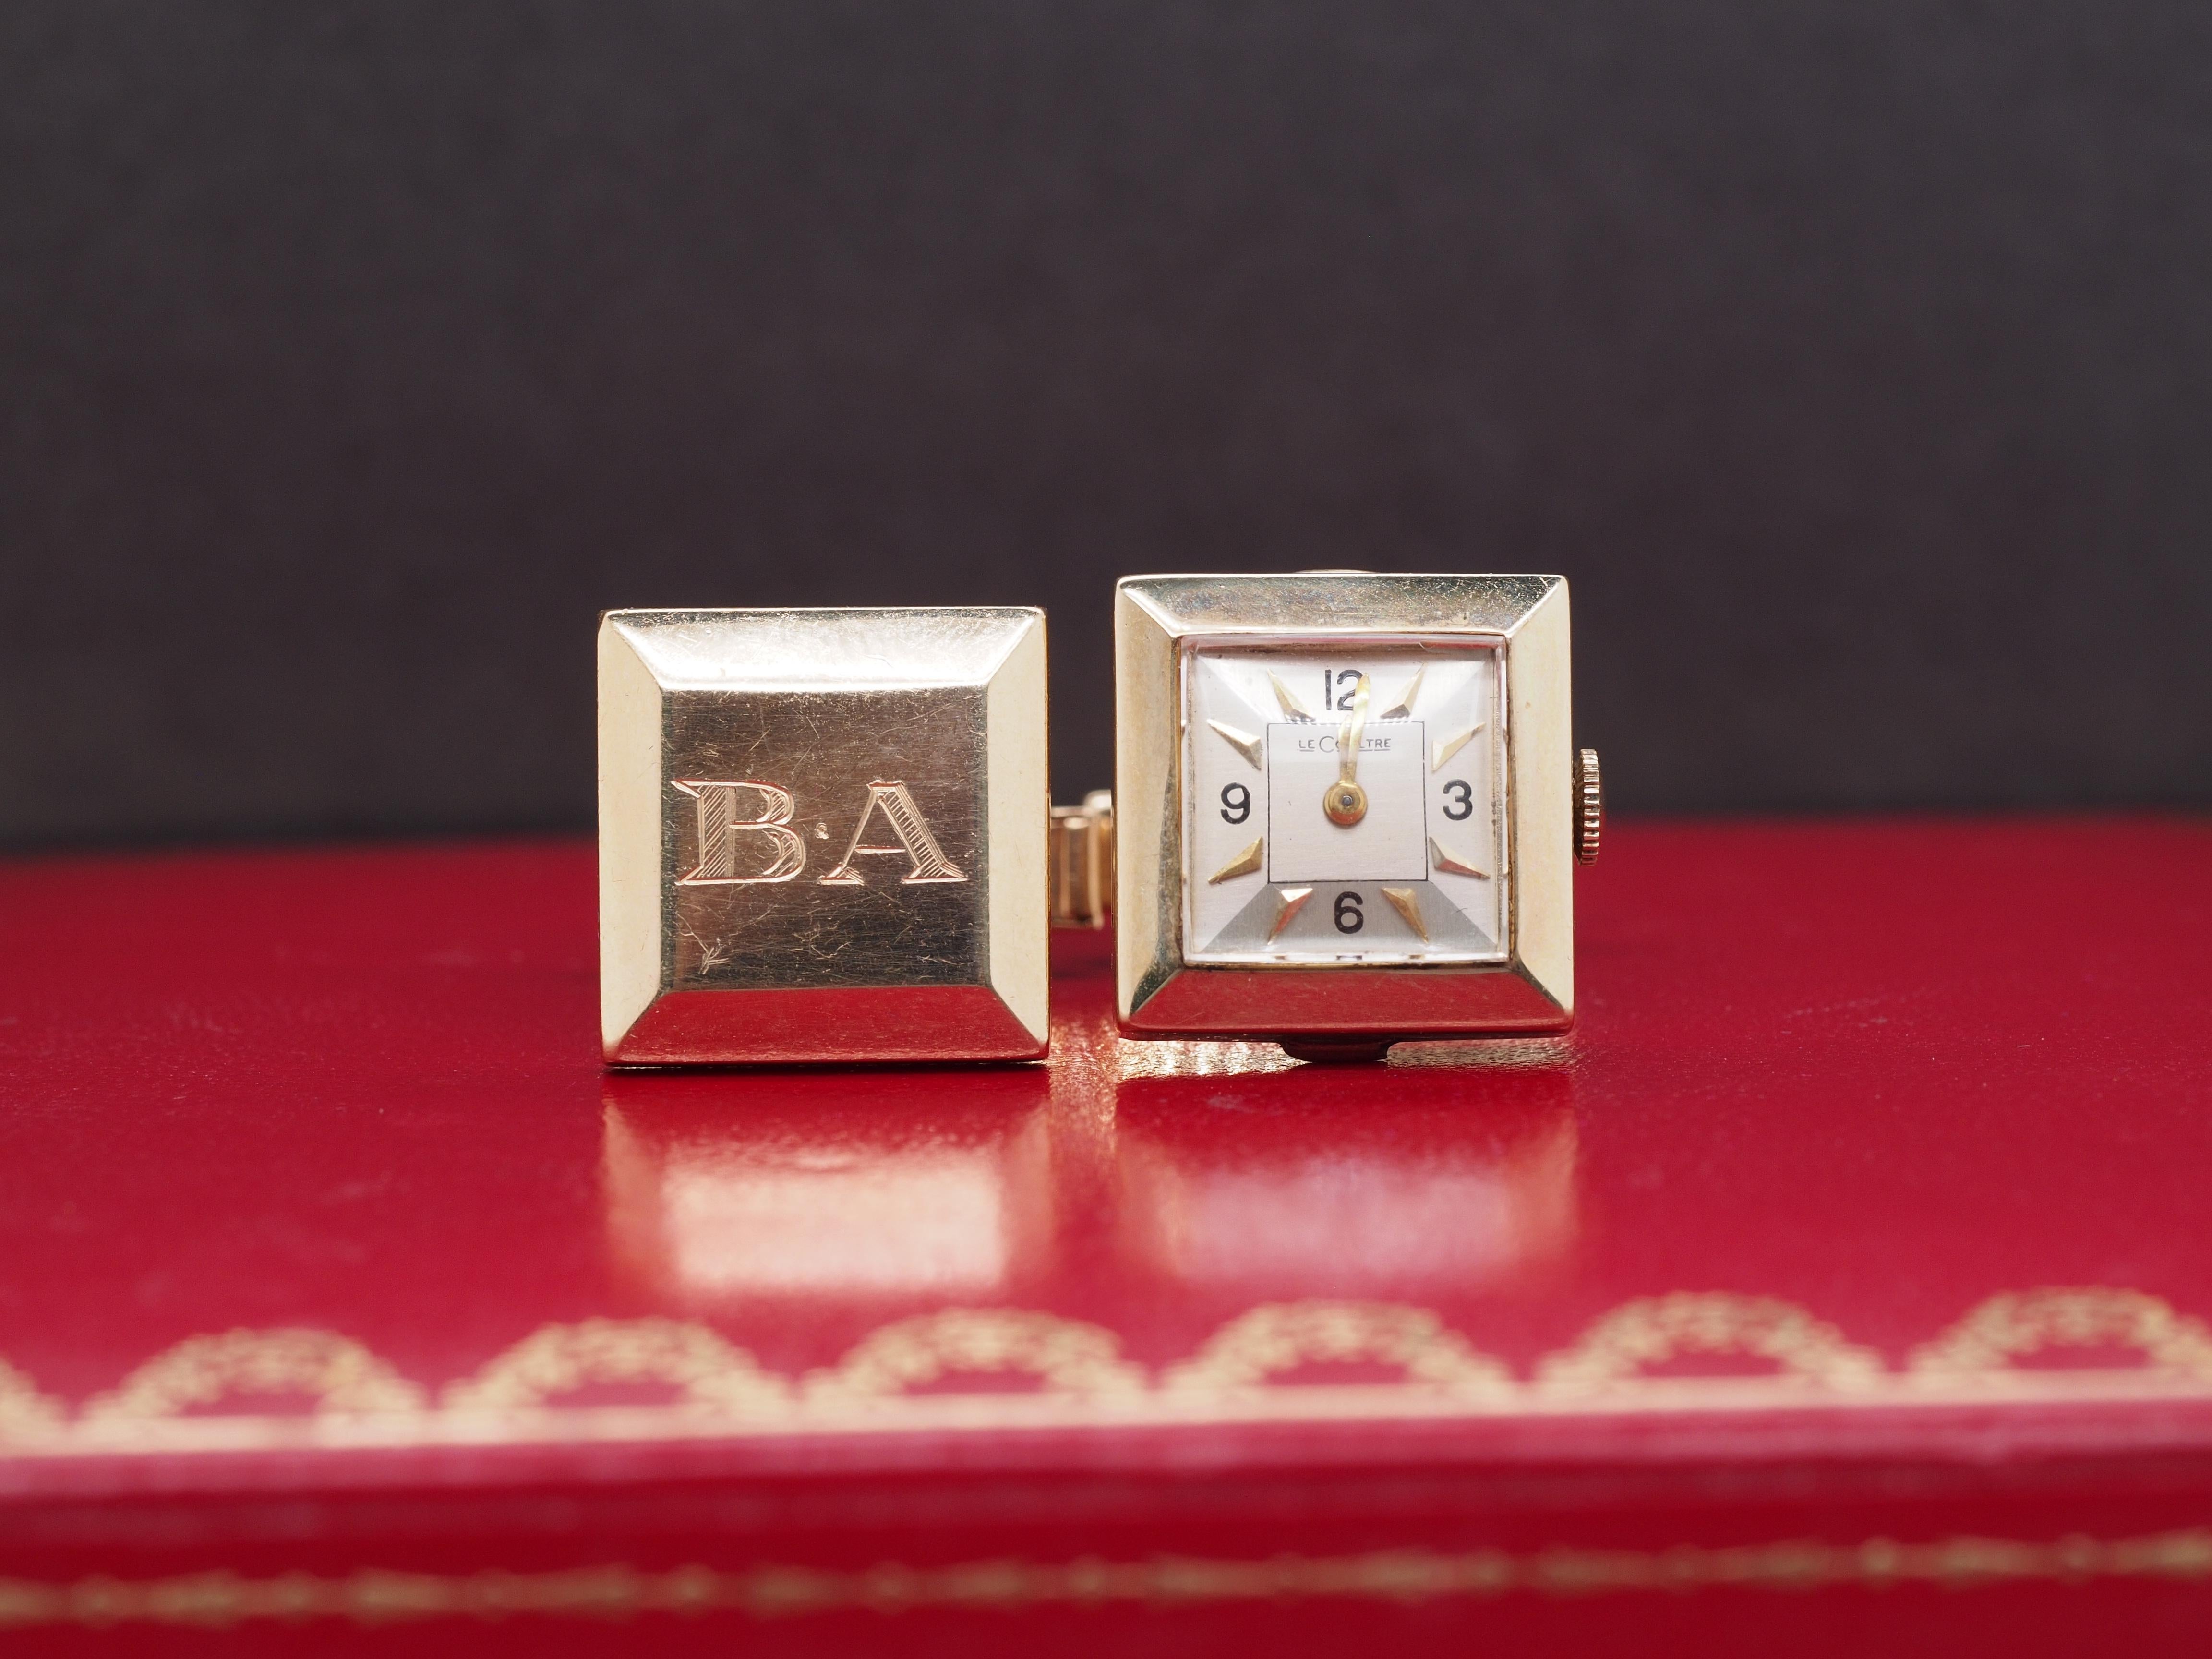 Year: 1950s
Hallmarks: 14K GOLD D&A, “ B A “
Item Details:
Metal Type: 14K Yellow Gold [Hallmarked, and Tested]
Weight: 16 grams
Watch: LeCoultre, Winding Movement, Running
Condition: Excellent